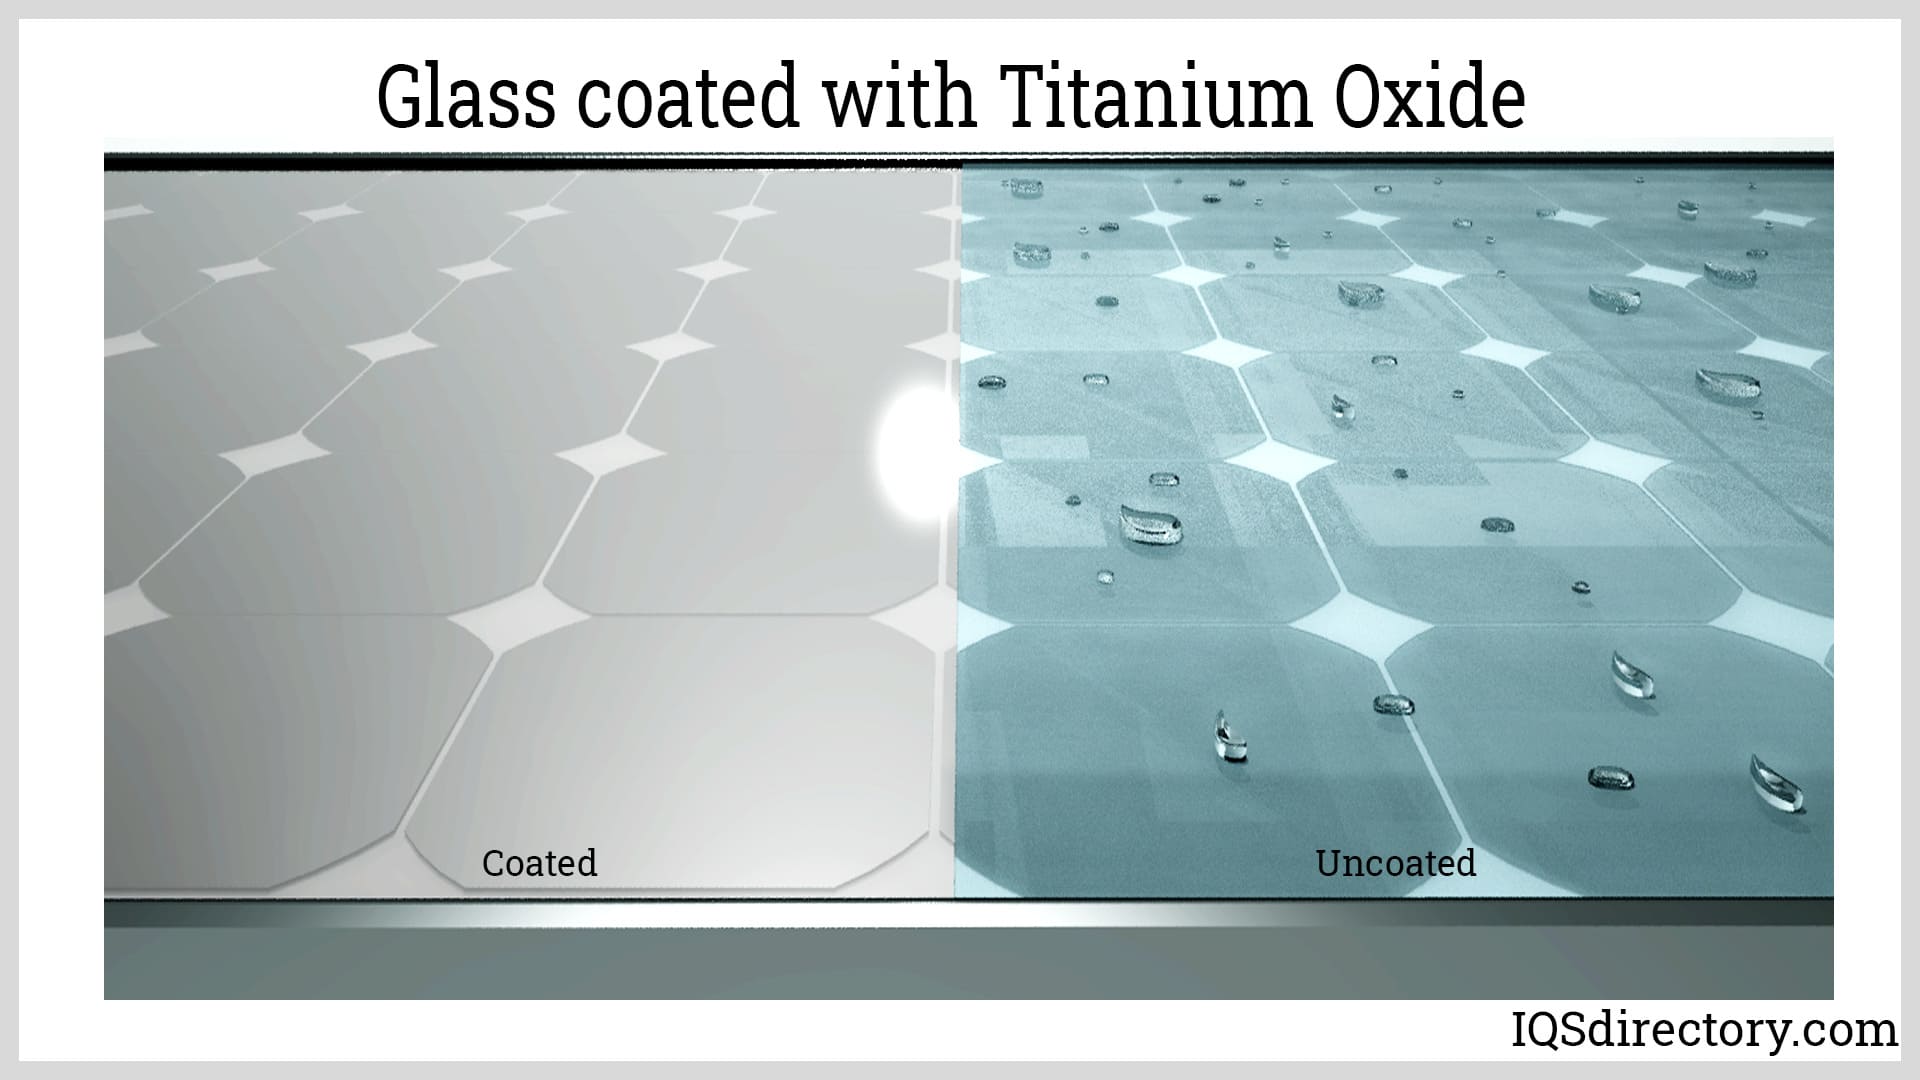 Glass coated with Titanium Oxide